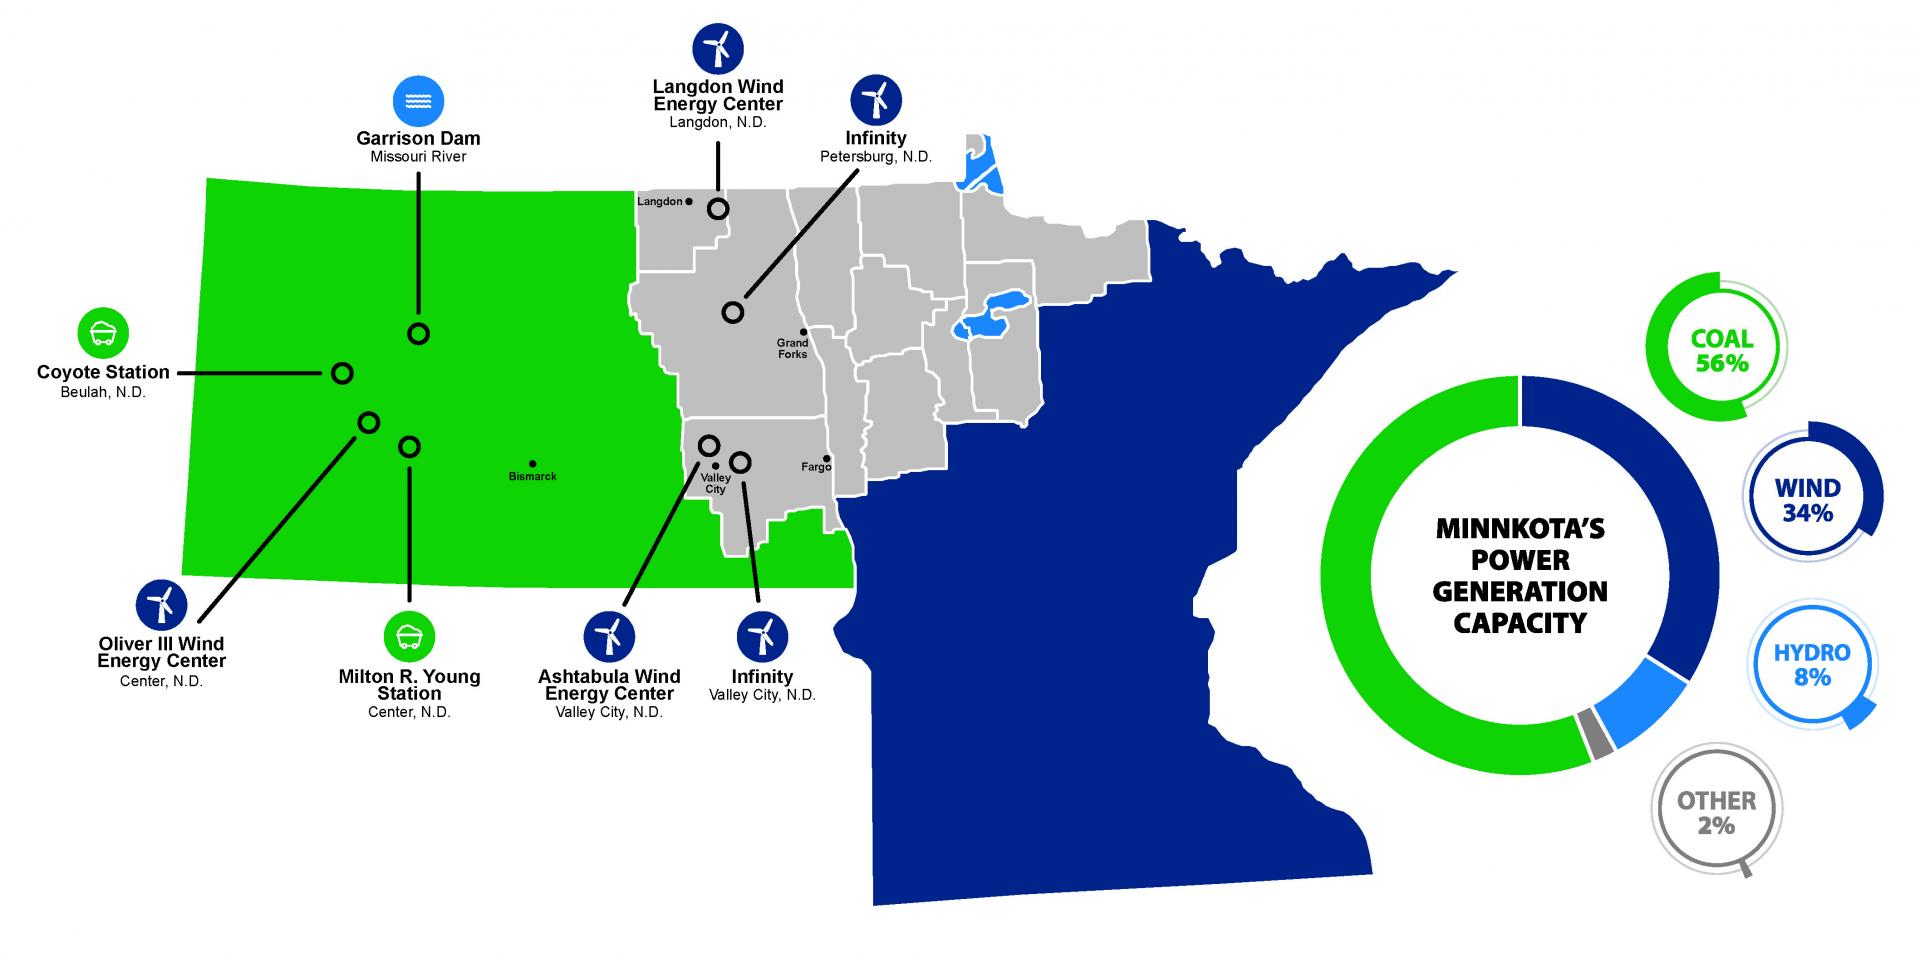 Minnkota Power Service Area and Resources Map